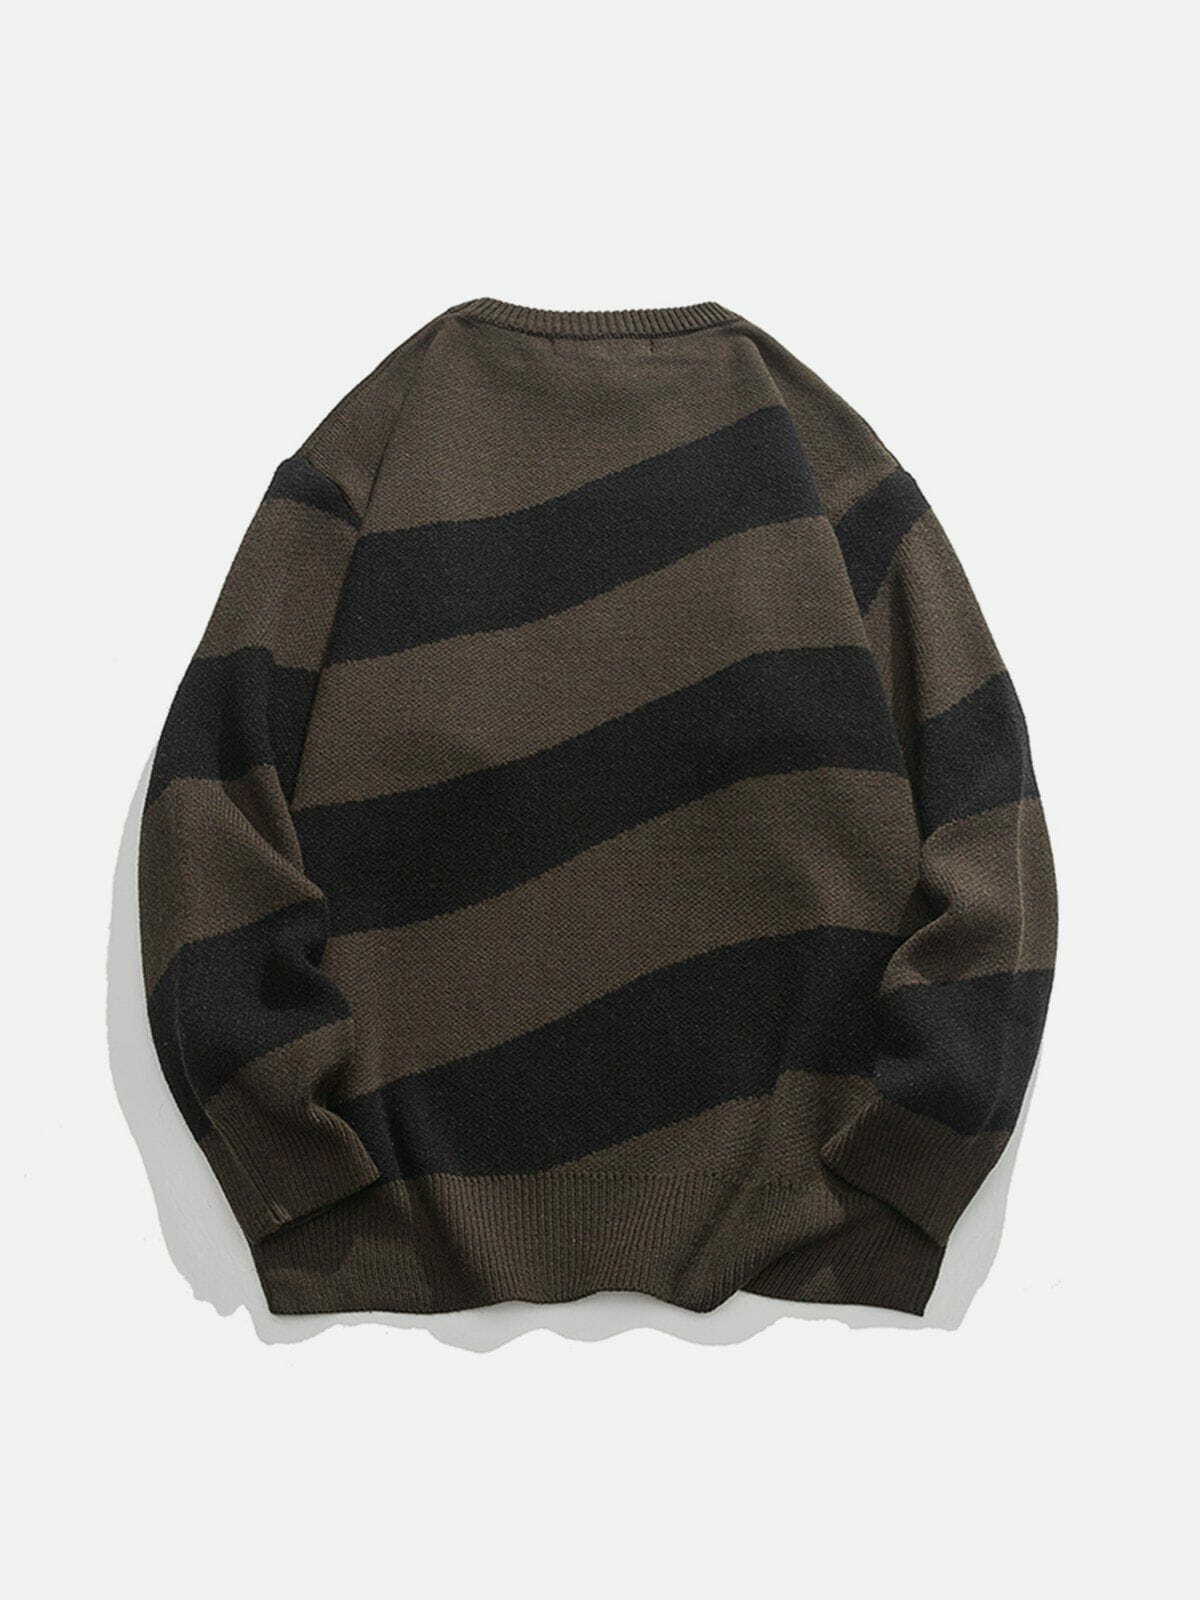 inclined stripe mountain sweater edgy knit streetwear essentials 5680